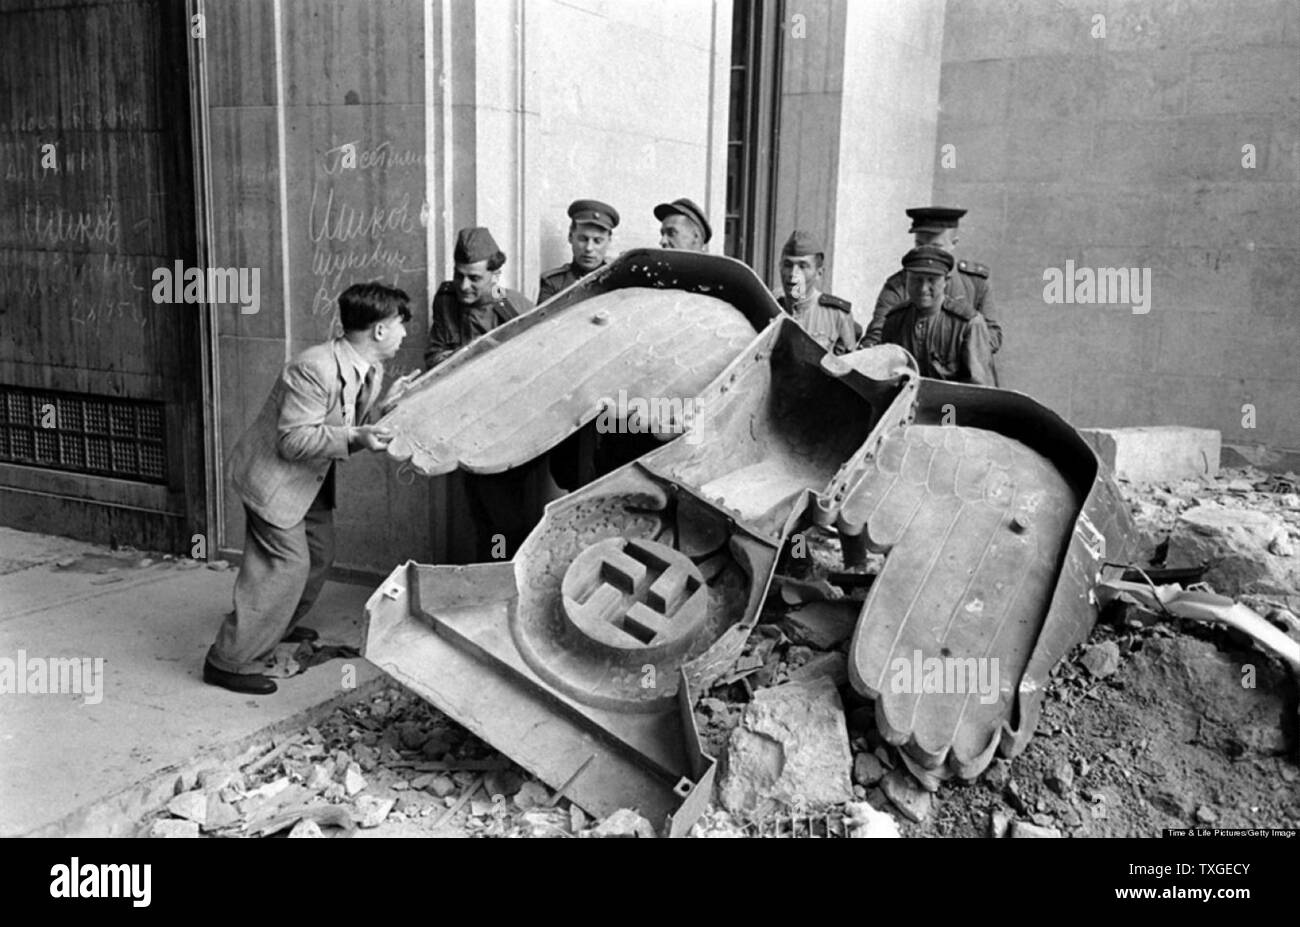 Photograph of Russian soldiers and a civilian struggle to move a large bronze Nazi Party eagle that once loomed over a doorway of the Reich Chancellery, Berlin. Dated 1945 Stock Photo